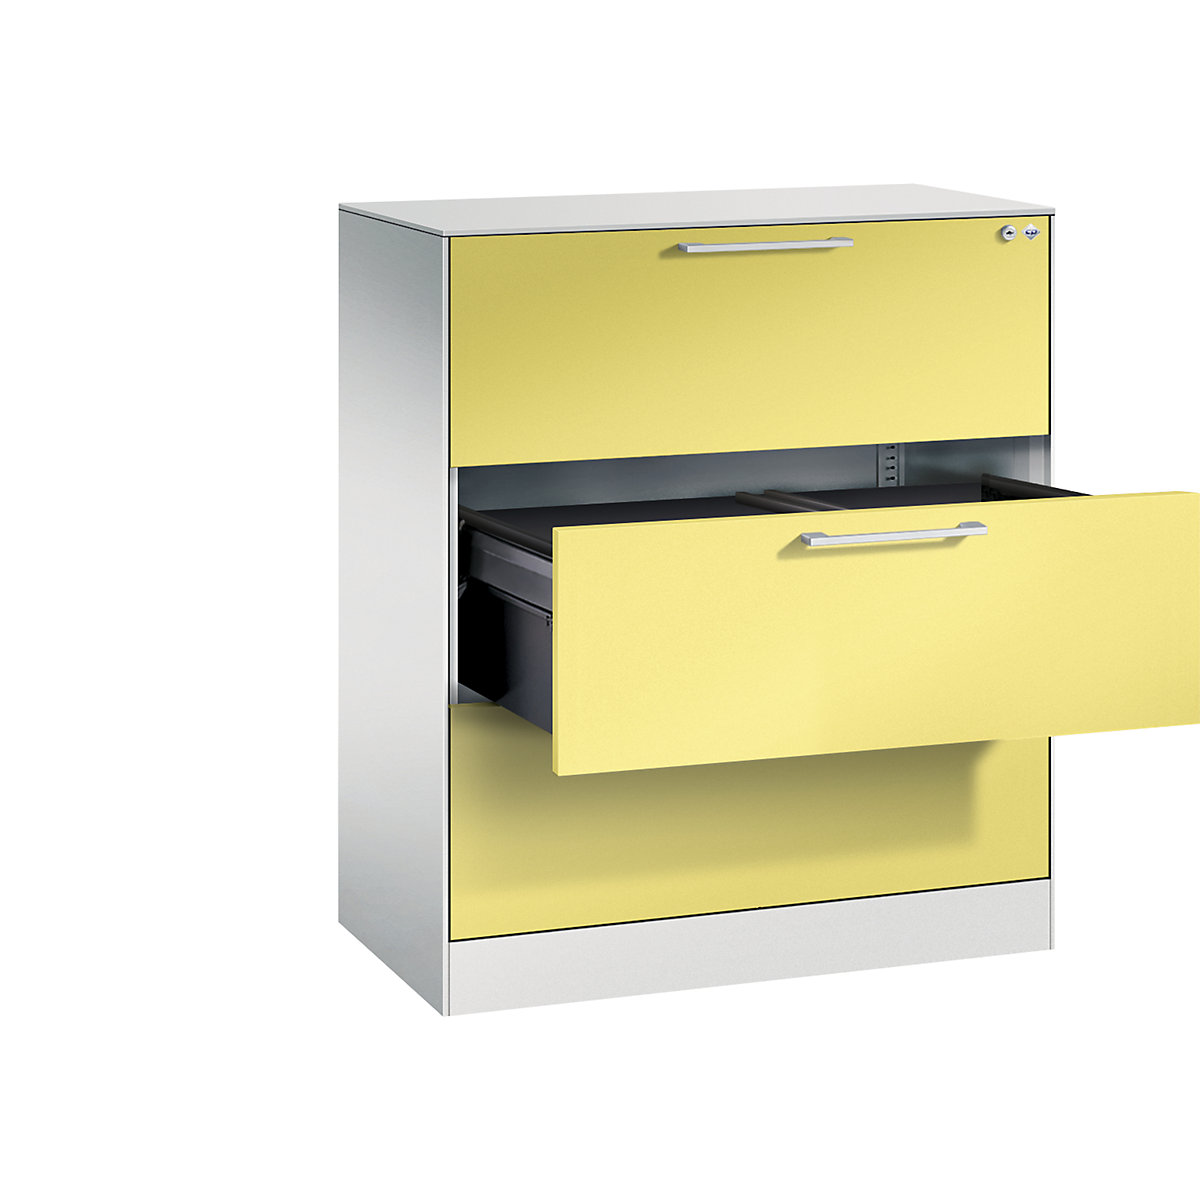 ASISTO suspension filing cabinet – C+P, width 800 mm, with 3 drawers, light grey/sulphur yellow-14